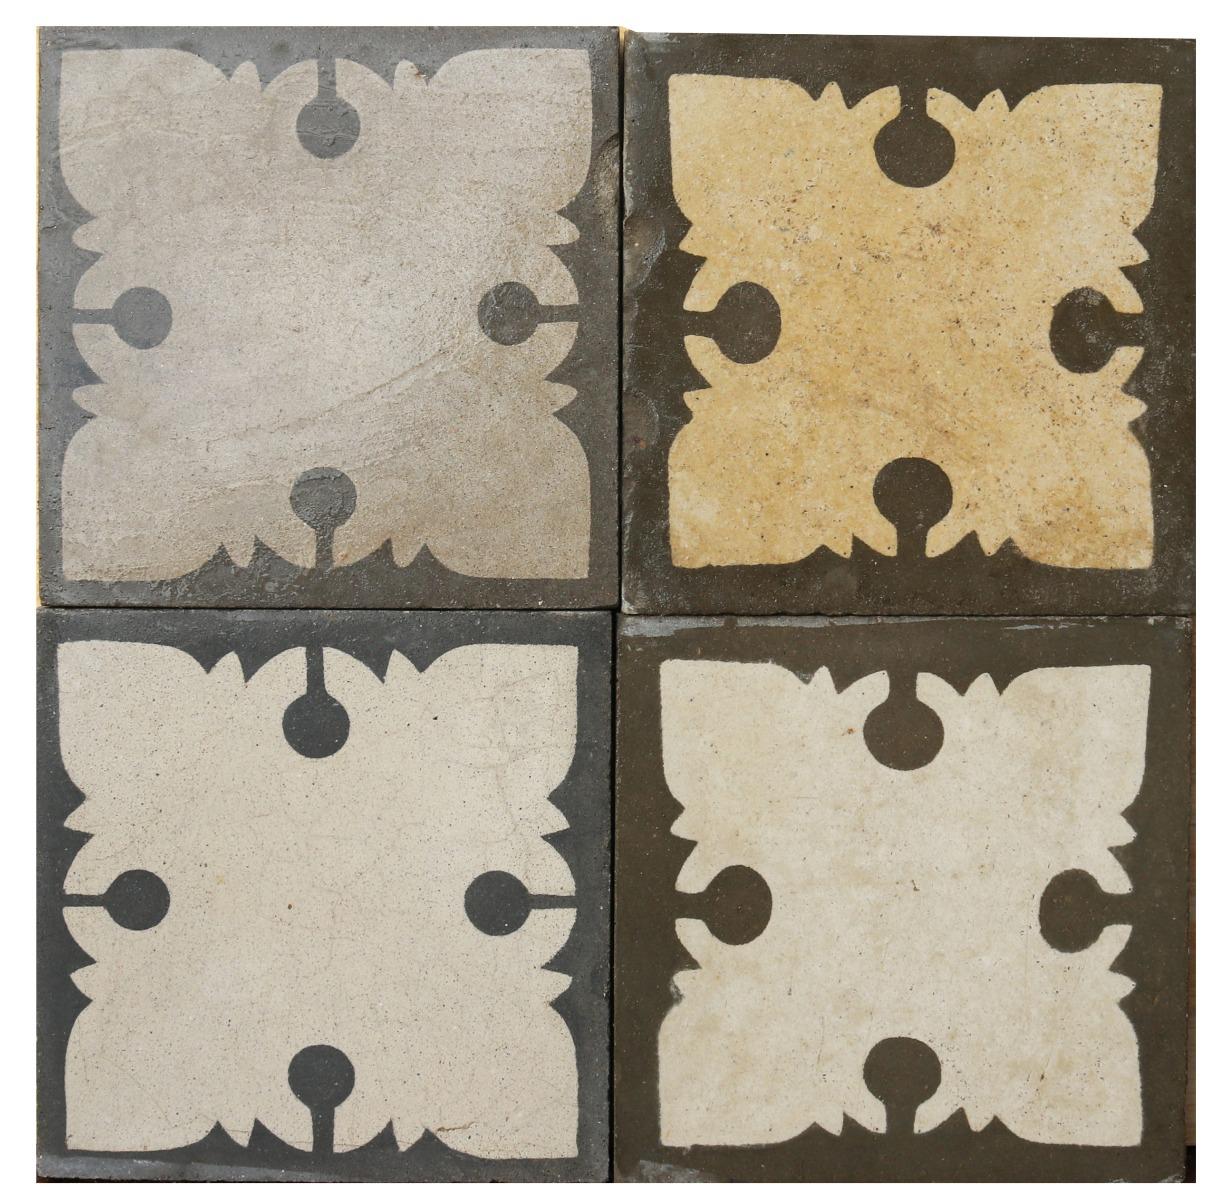 A set of 200 reclaimed encaustic cement floor tiles. These tiles will cover 8 m2 or 86 sq ft.